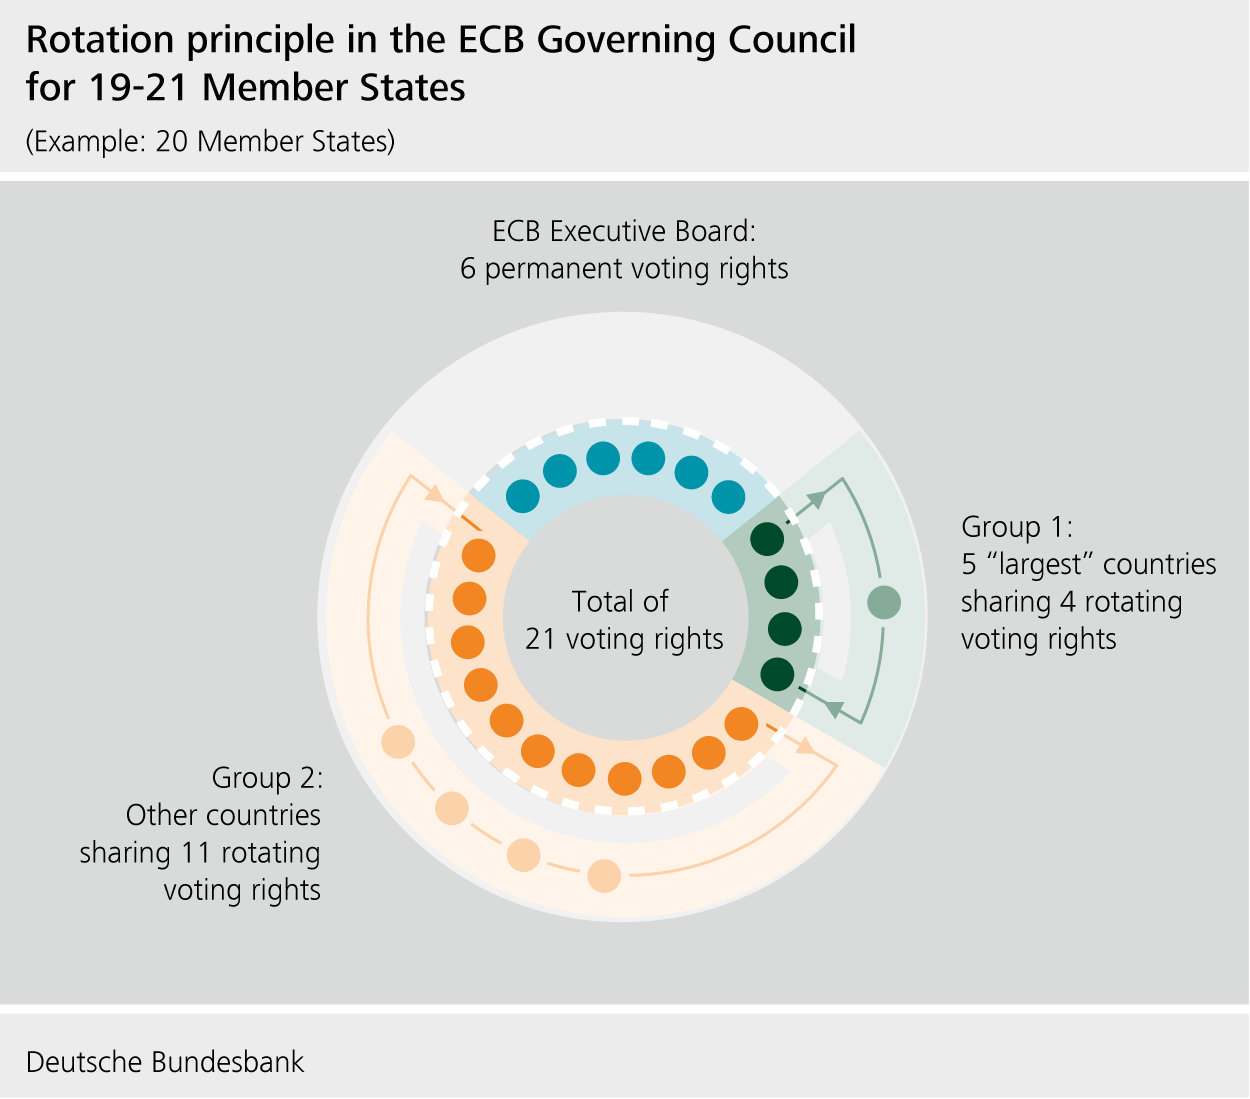 Rotation principle in the Governing Council with 19-21 member states